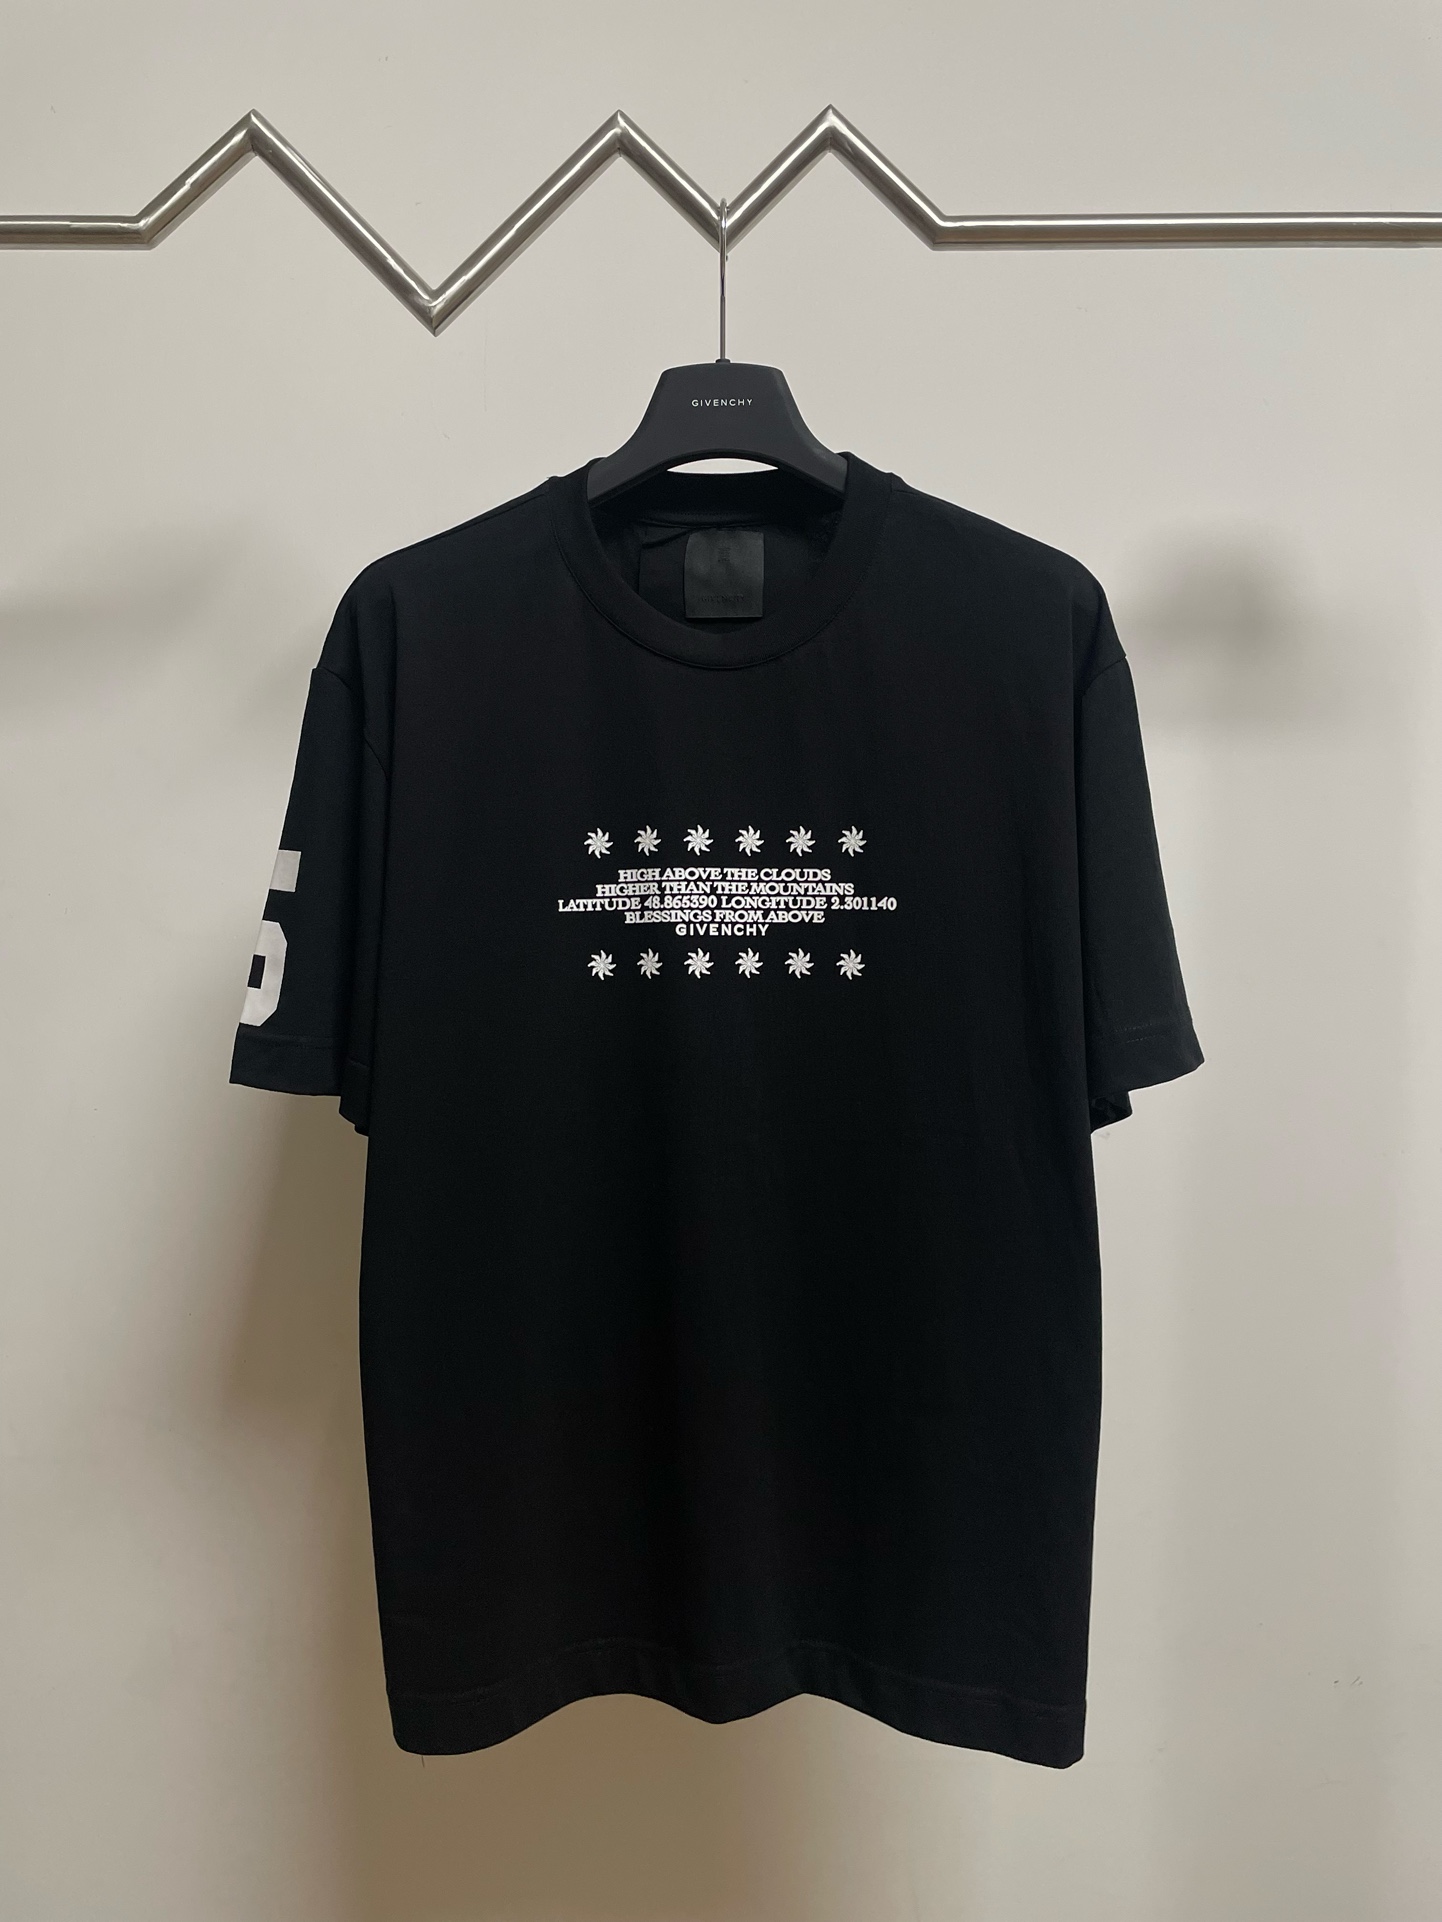 Givenchy Clothing T-Shirt Black Printing Unisex Cotton Mercerized Spring/Summer Collection Short Sleeve